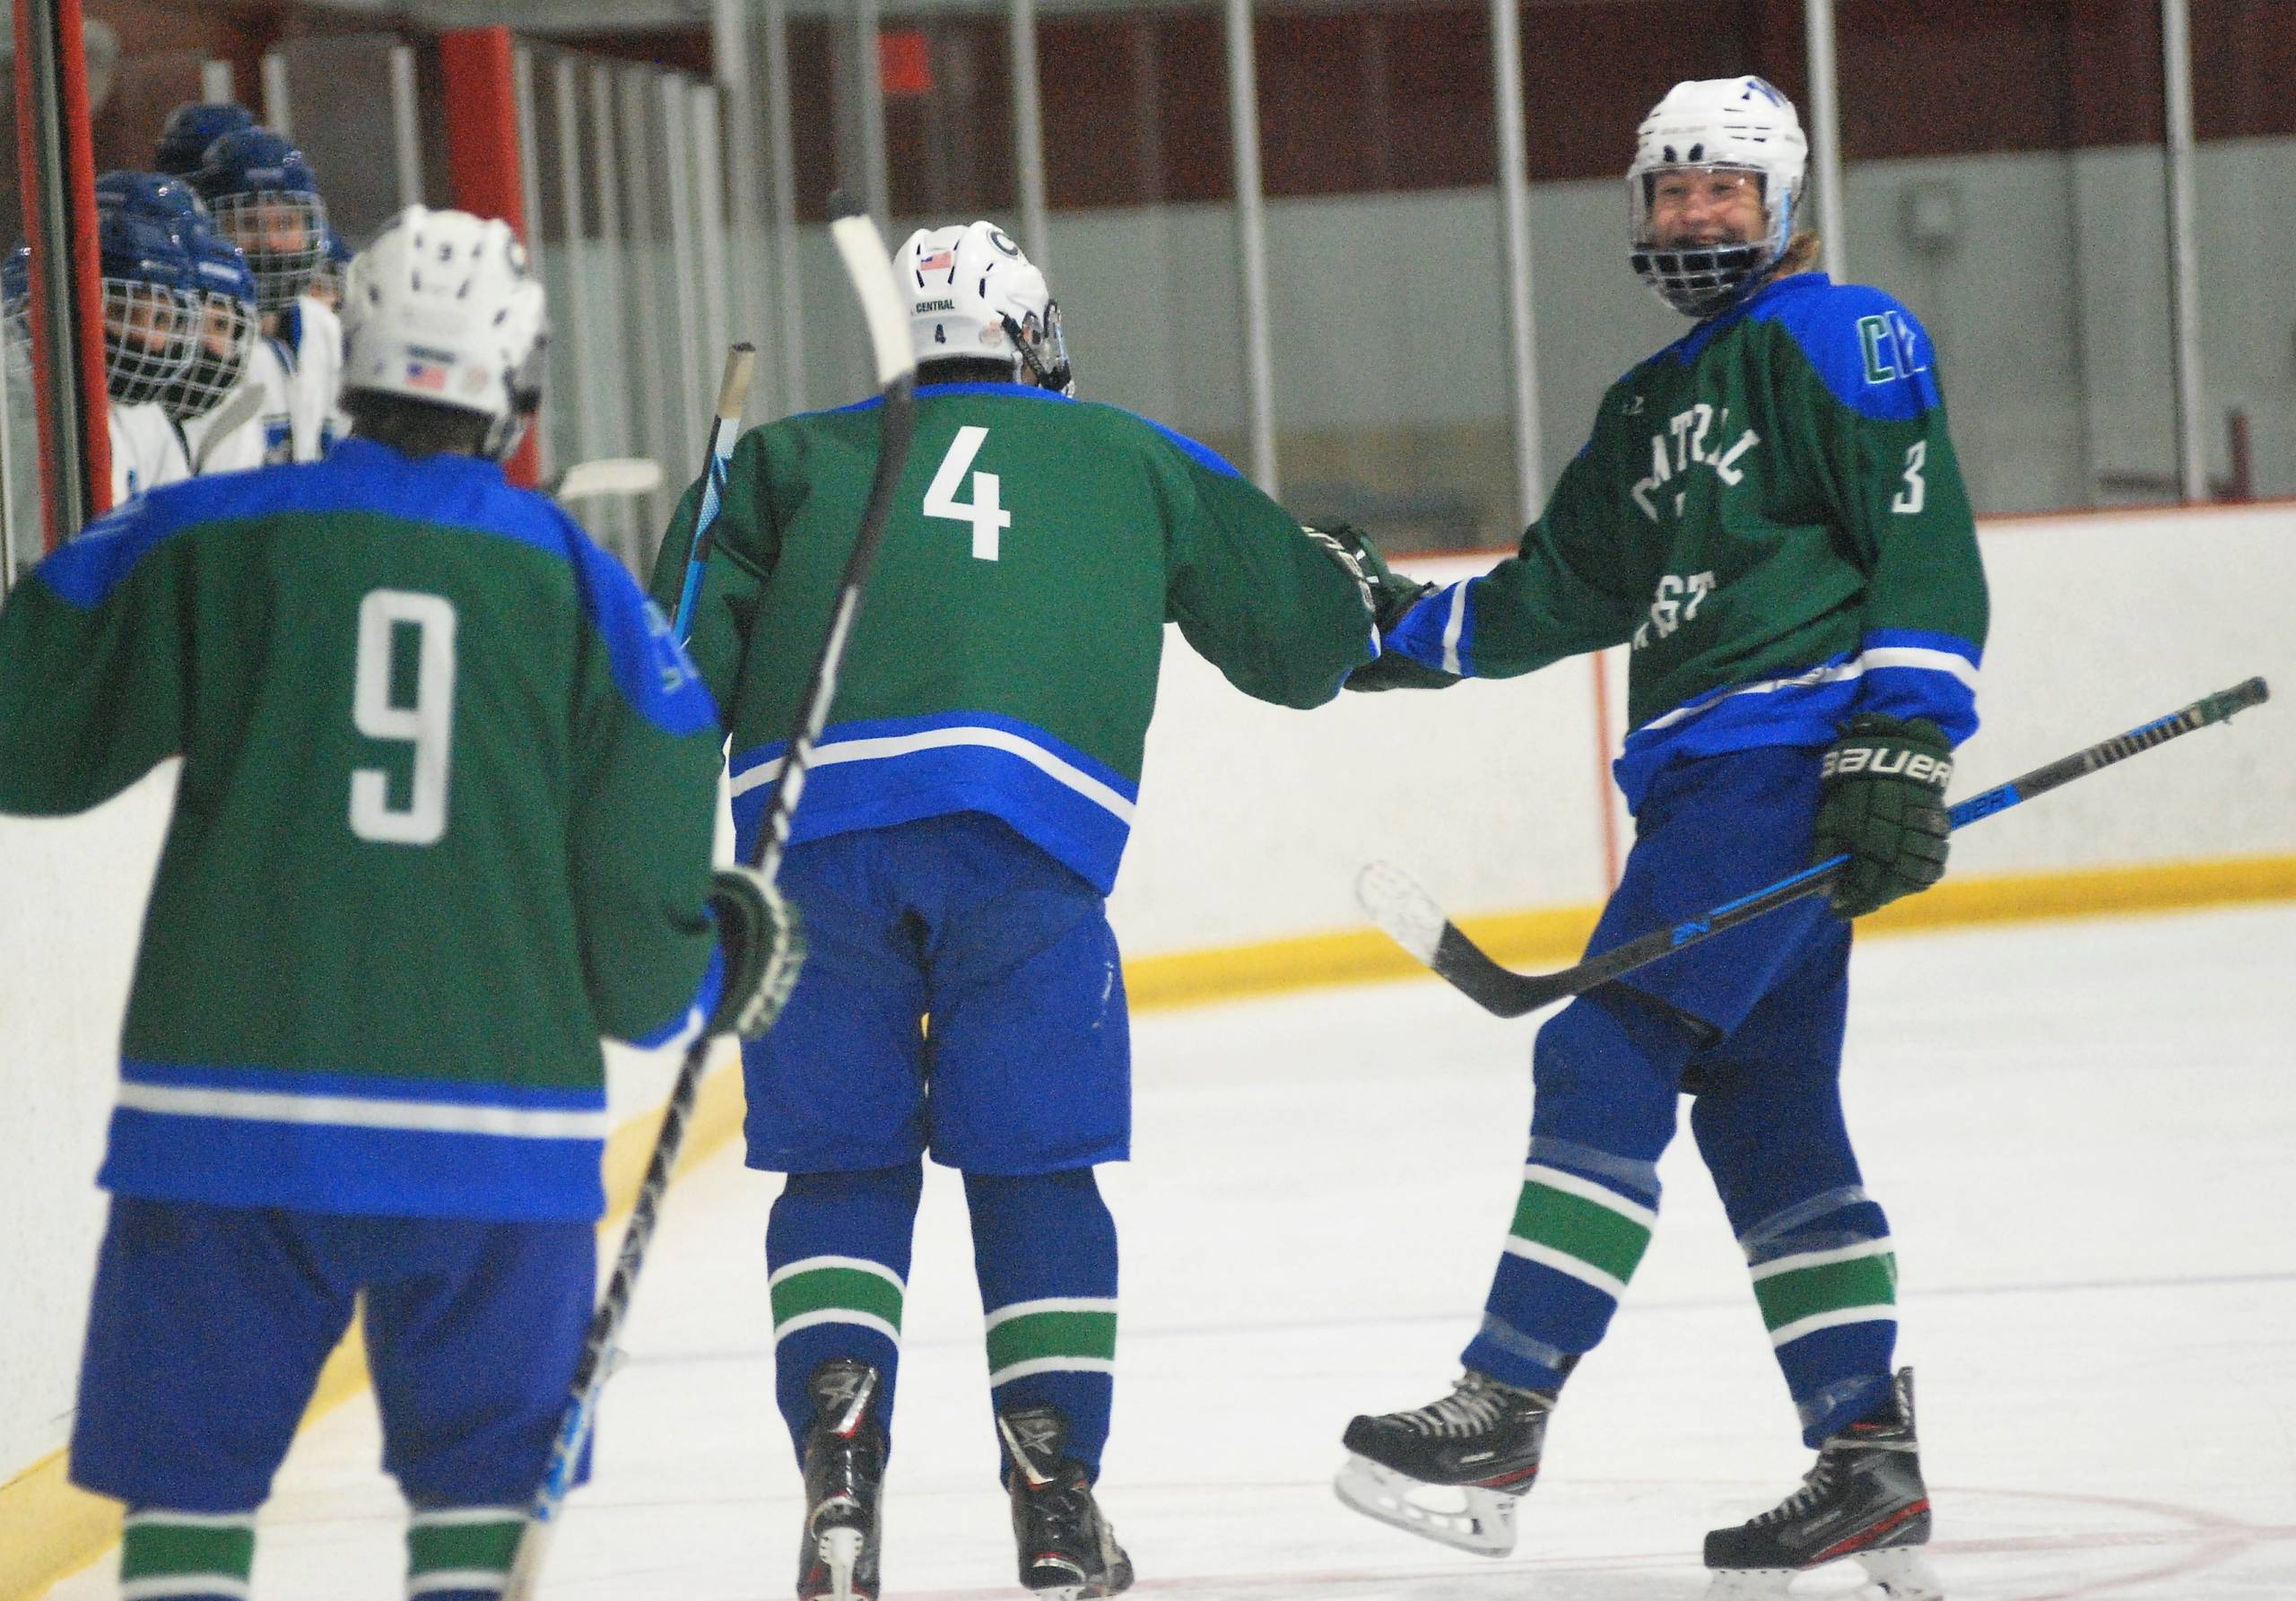 After working through Merrimack's normally tight blue line to score Central/West's second goal of the game, Aiden Owen (no. 4) is congratulated by Owen Kelley, right, while Matt LaForge (no. 9) looks on.